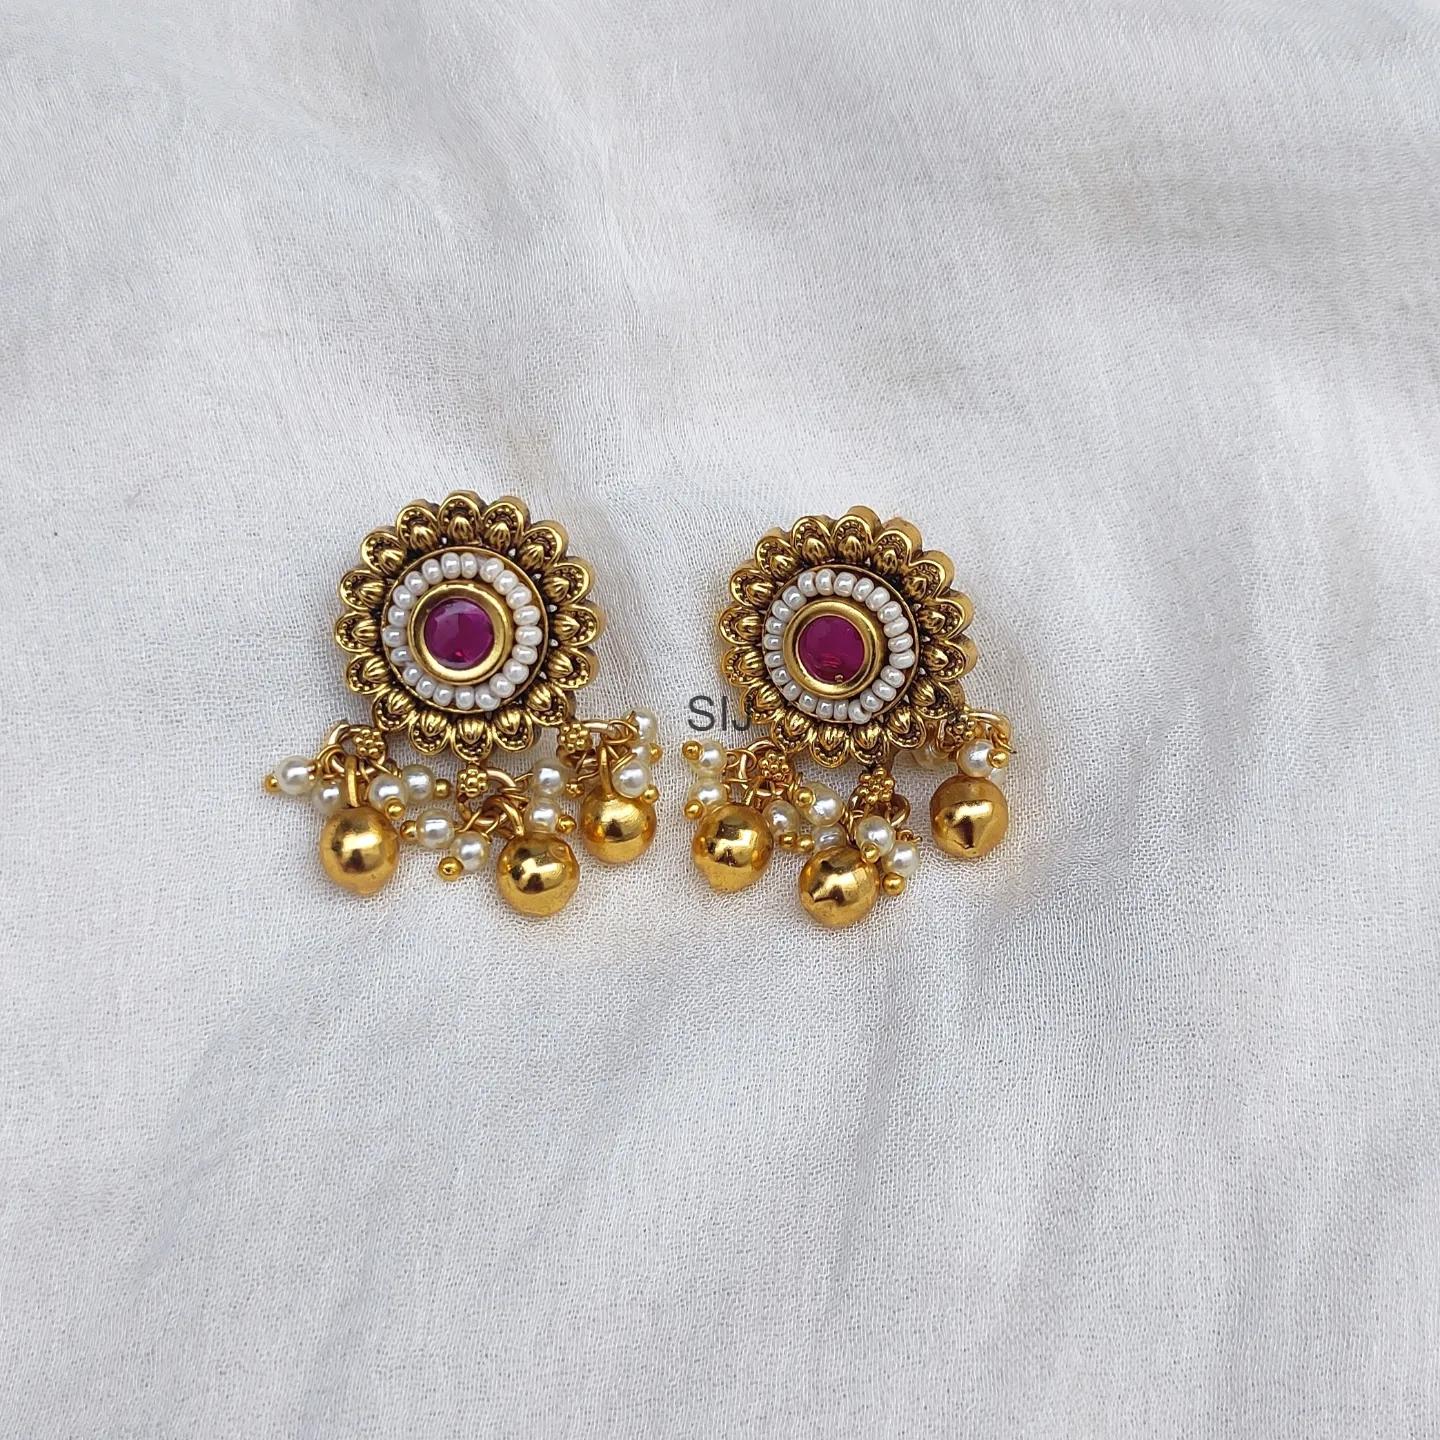 Antique Round Flower Design Pink Stone Earrings